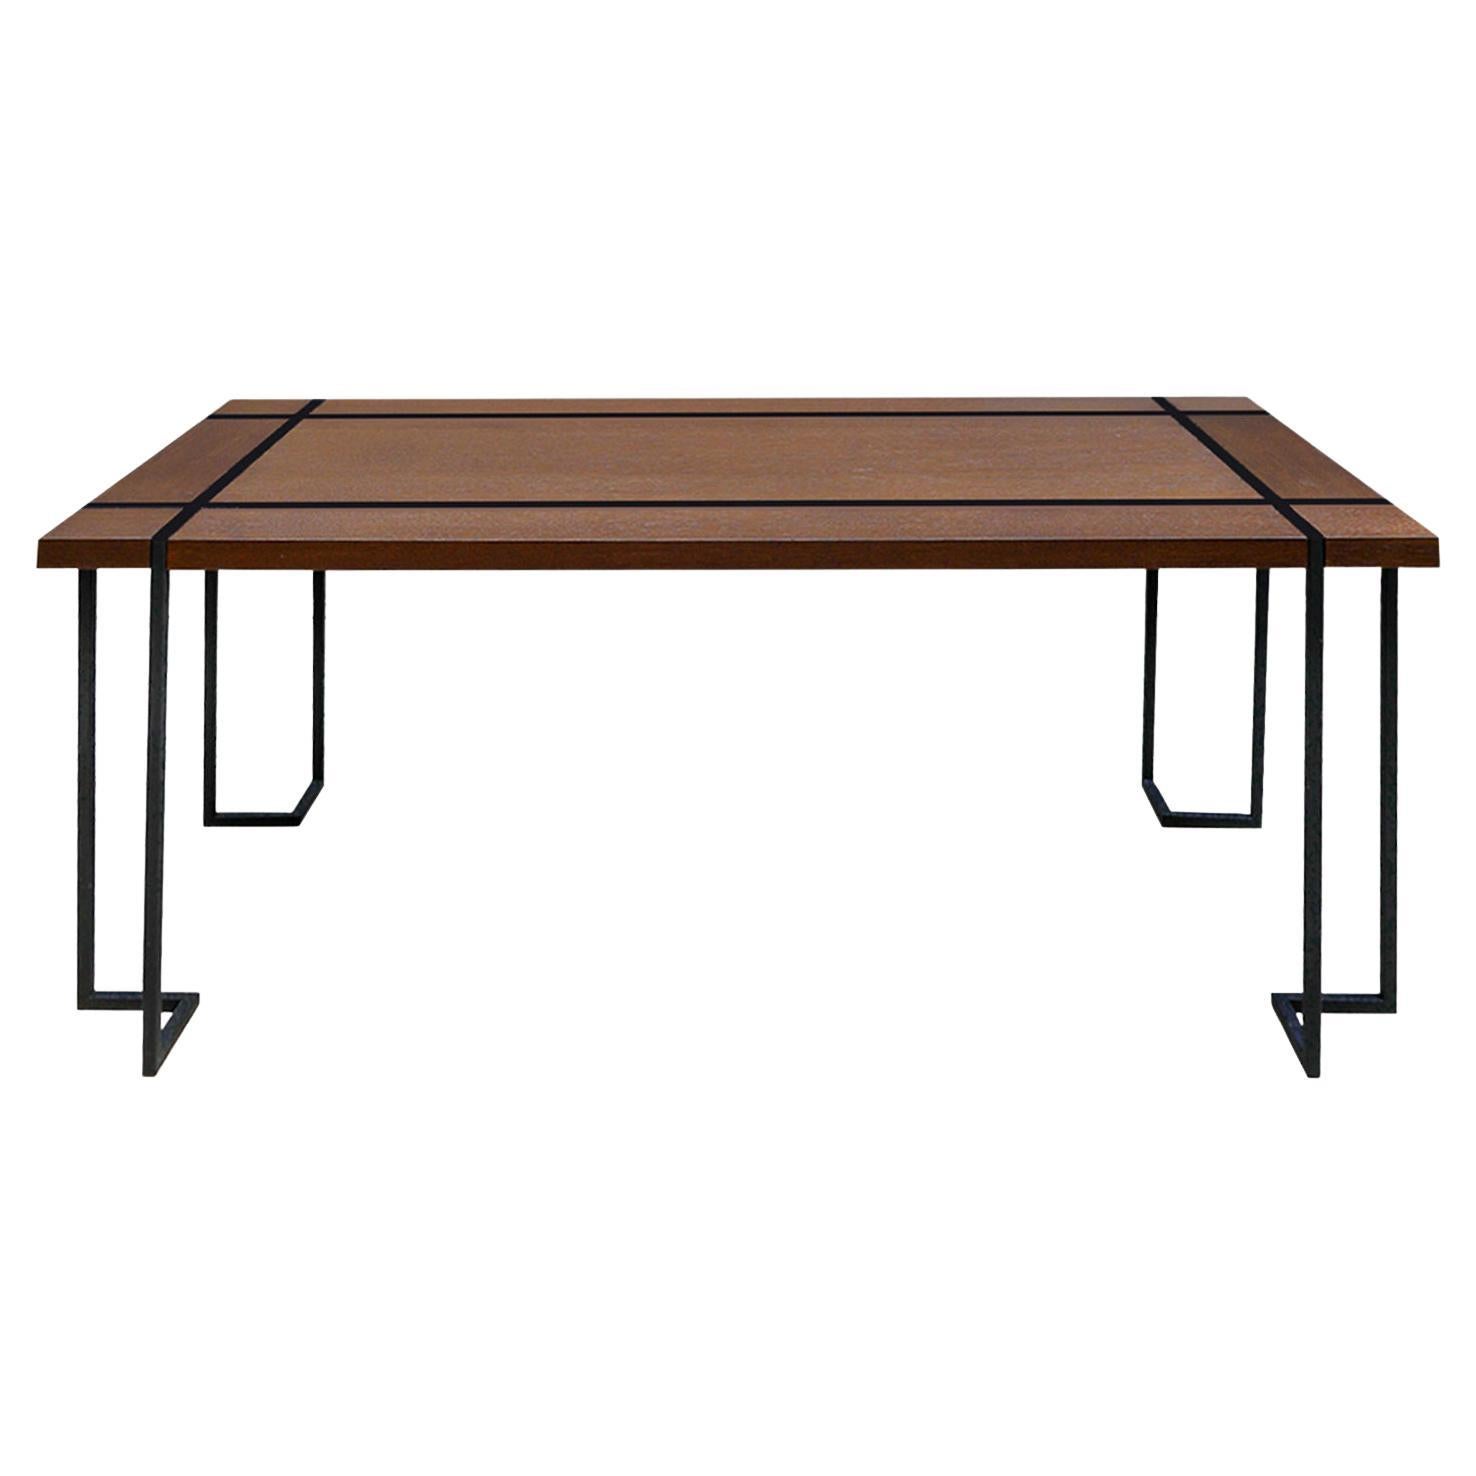 **LEAD TIME 4 WEEKS
**CUSTOMIZABLE

Revealing all the beauty of dark wood with the black line detail intersecting at the corners, RIBBON TABLE accompanies your most enjoyable moments with your family...

Width: 78.7'' / Depth: 39.4'' / Height: